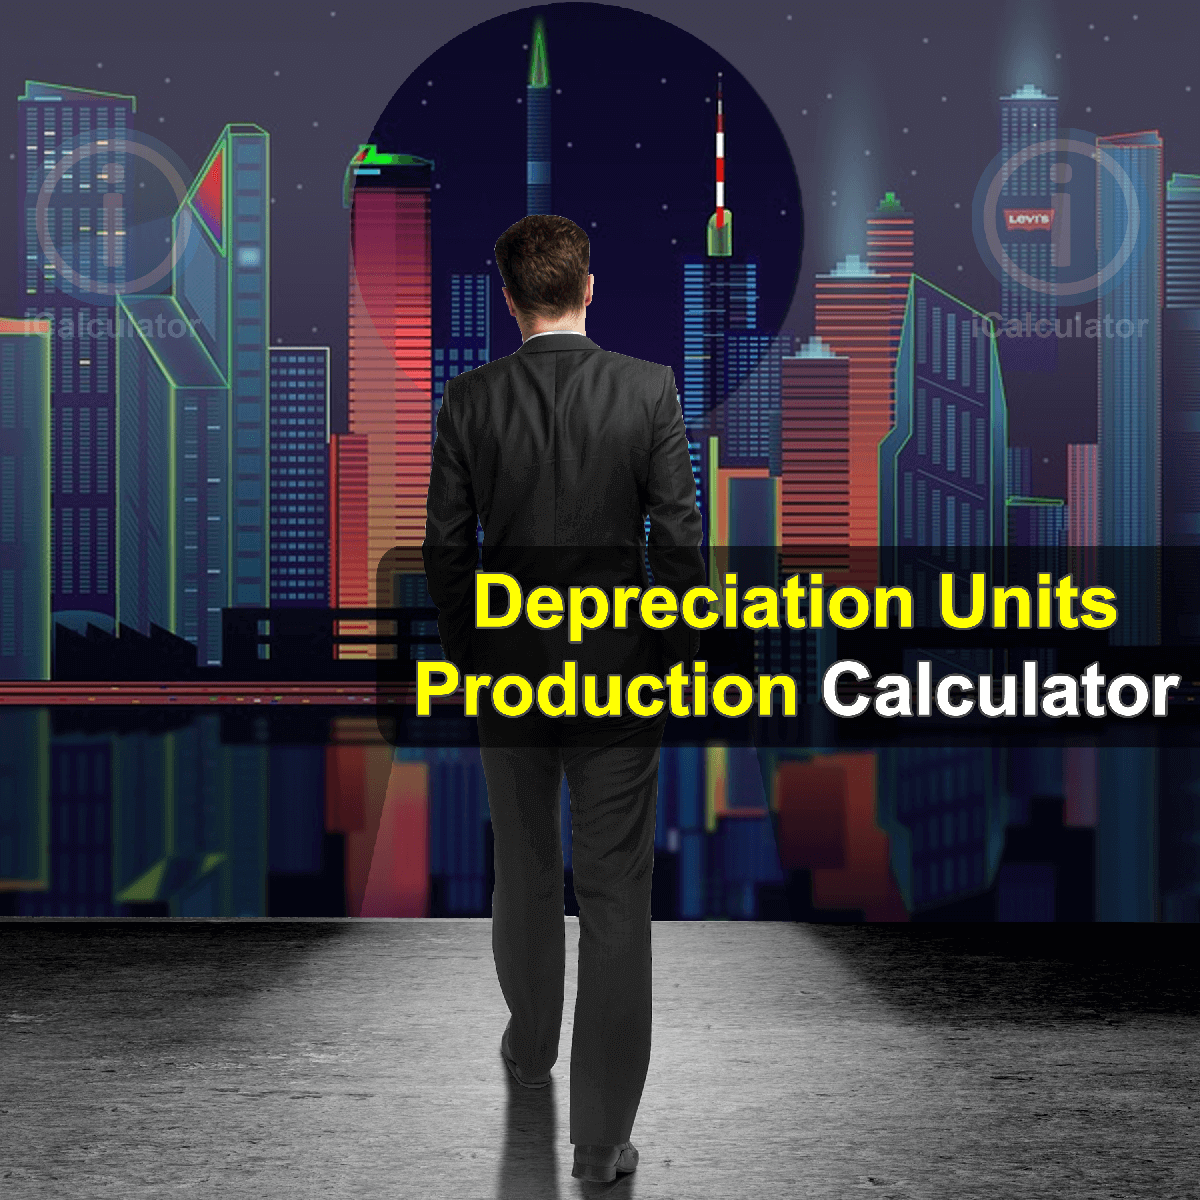 Units of Production Depreciation Calculator. This image provides details of how to calculate Units of Production Depreciation Ratio using a calculator and notepad. By using the Units of Production Depreciation Ratio formula, the Units of Production Depreciation Calculator provides a true calculation of the depreciation expense on an asset considering the actual usage of the asset, which makes it the most accurate metric for charging depreciation